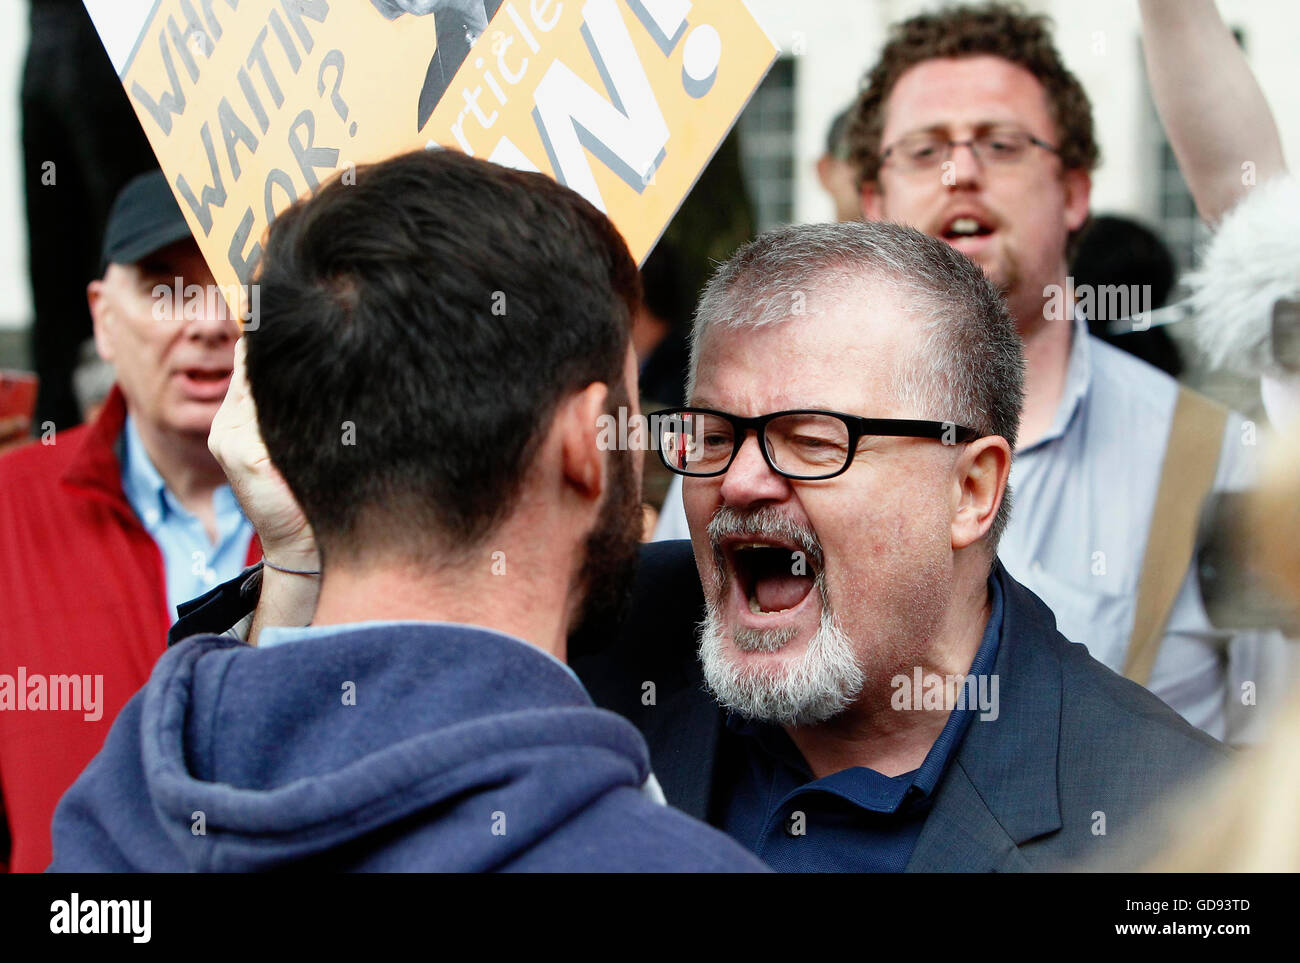 London, UK. 13th July, 2016. Brexit and remain supporters clash/demonstrate opposite Downing Street on the first day as prime minister of Theresa May. Credit:  Eye Ubiquitous/Alamy Live News Stock Photo